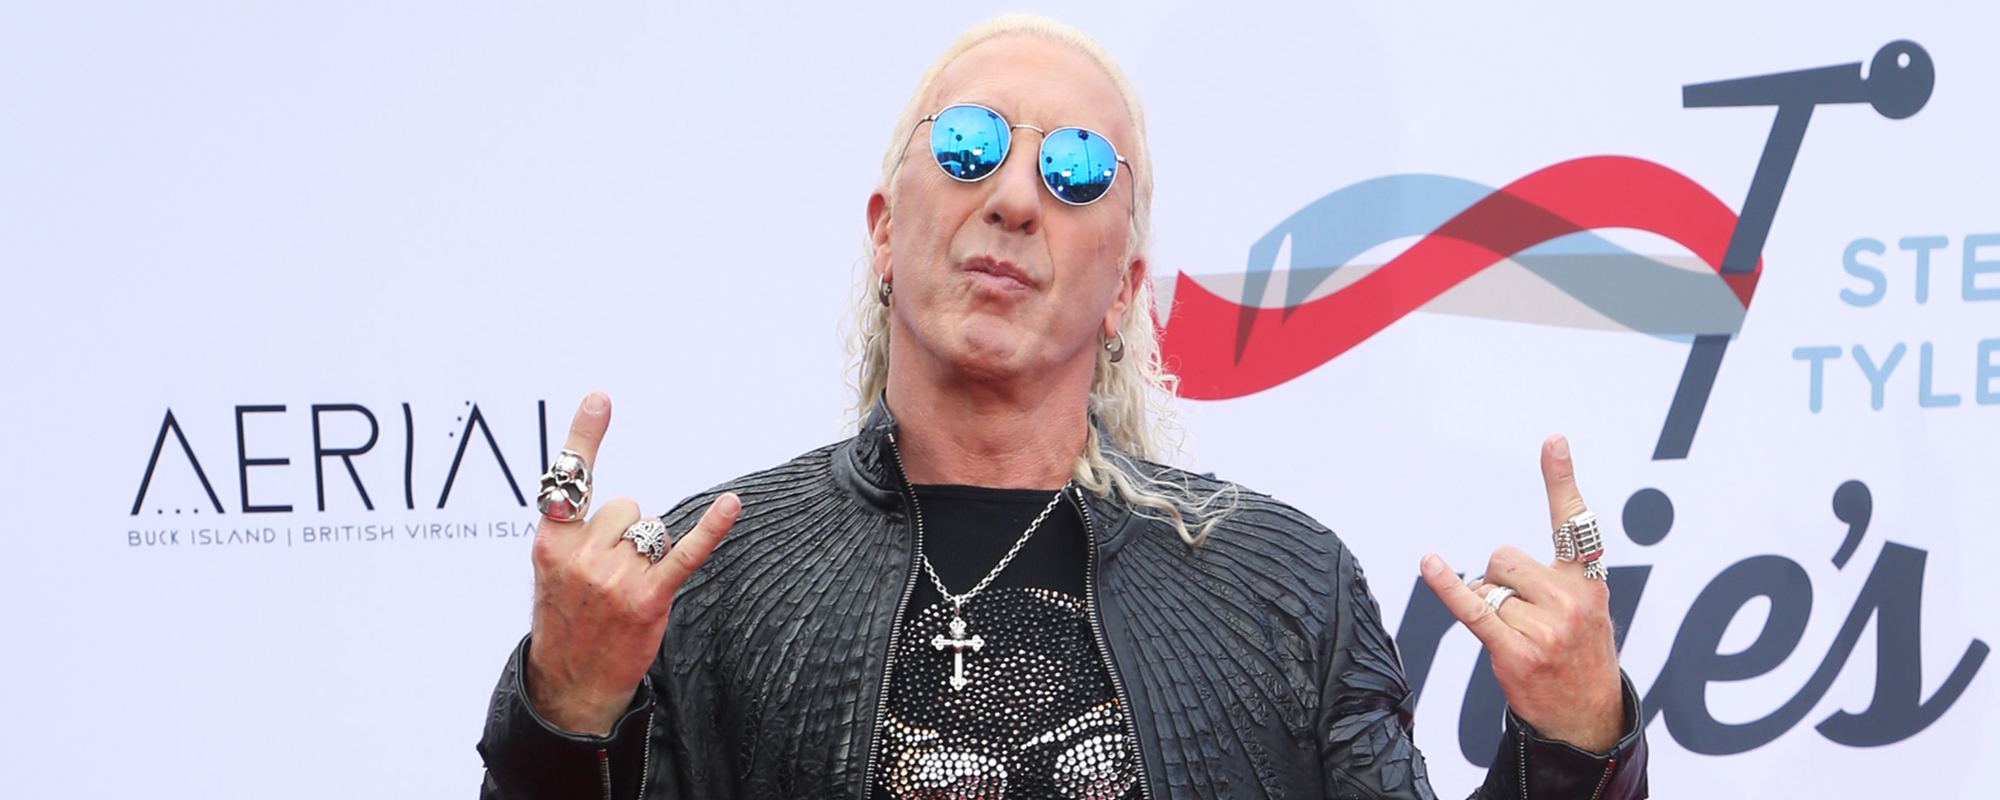 Dee Snider Goes Scorched Earth on Spotify CEO, Says “He Should Be Taken Out and Shot”